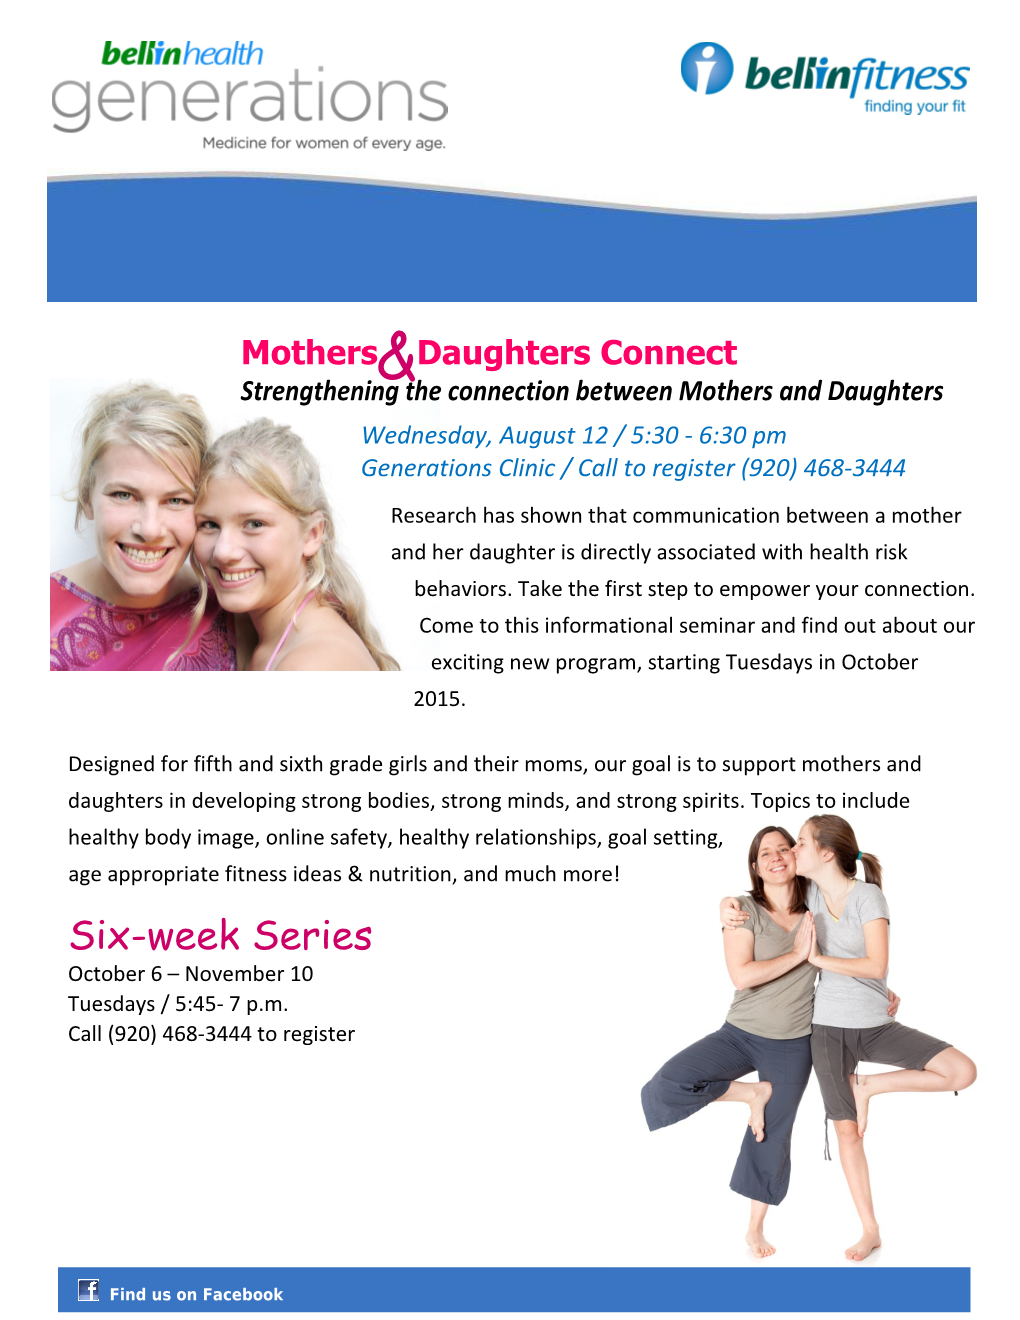 Strengthening the Connection Between Mothers and Daughters